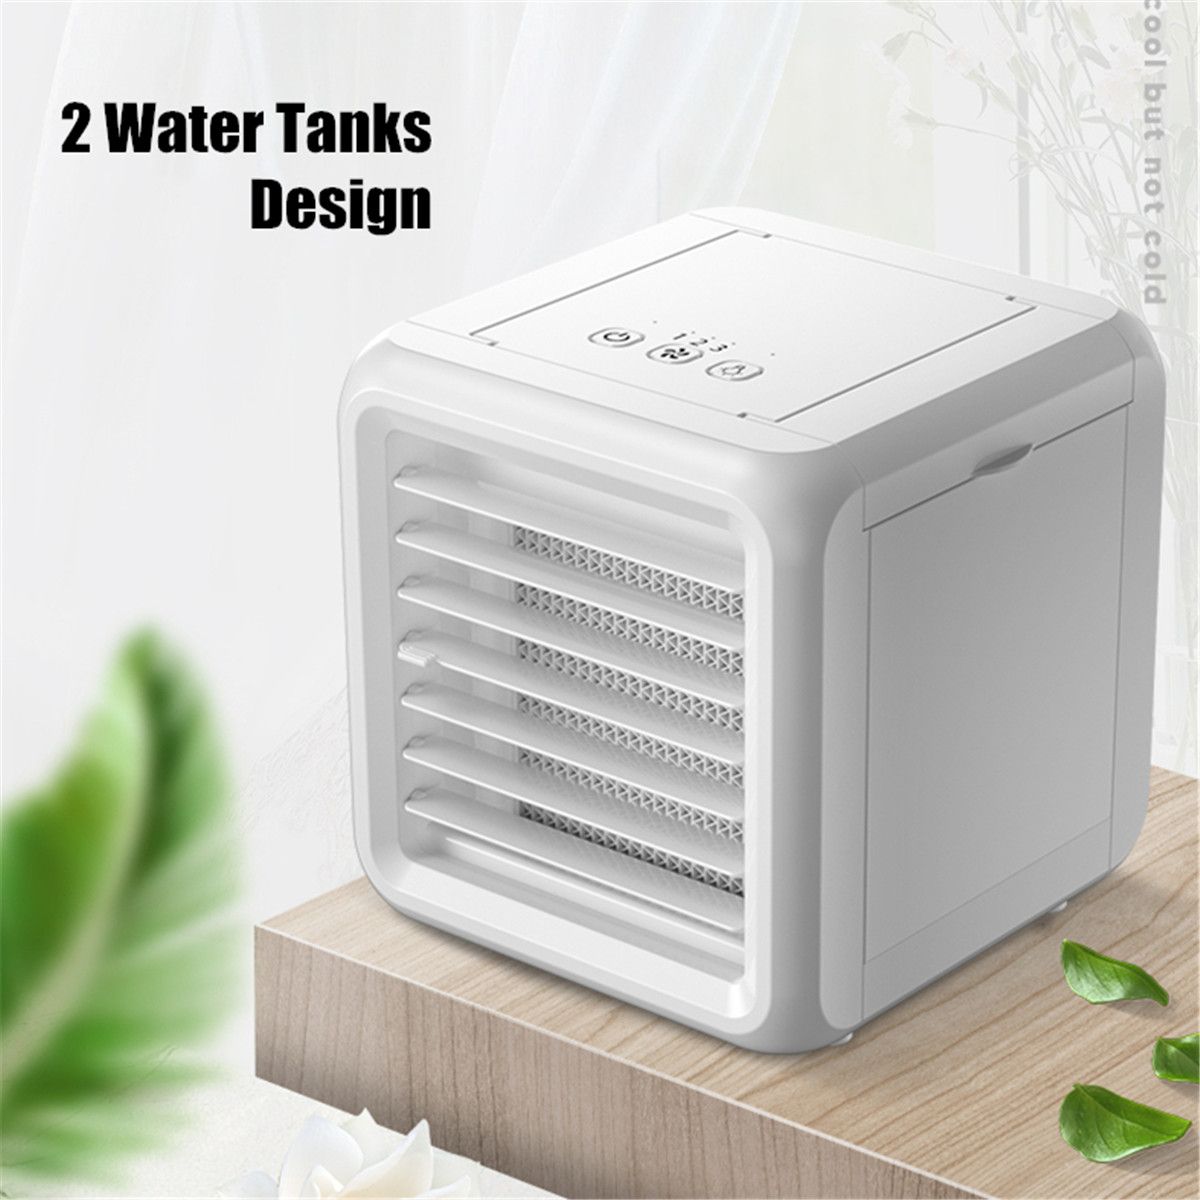 Artic-Air-Cooler-Portable-Mini-Air-Conditioner-Humidifier-Purifier-Cooler-Cooling-Fan-1635966